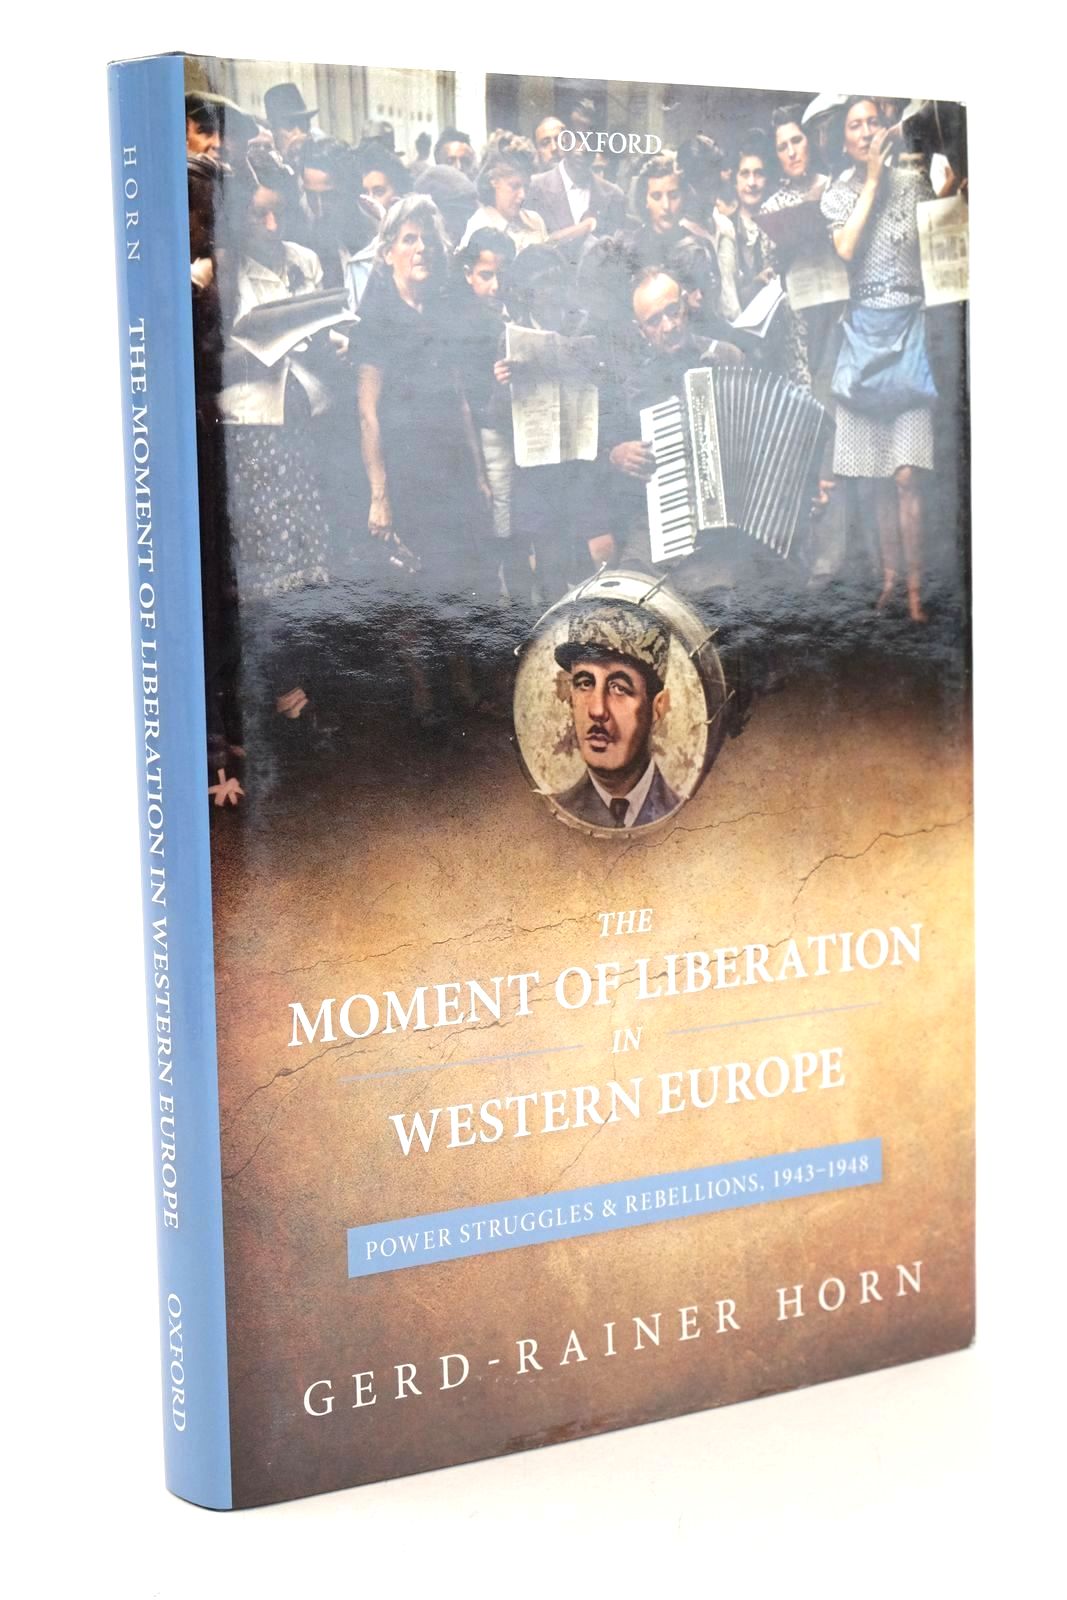 Photo of THE MOMENT OF LIBERATION IN WESTERN EUROPE written by Horn, Gerd-Rainer published by Oxford University Press (STOCK CODE: 1327129)  for sale by Stella & Rose's Books